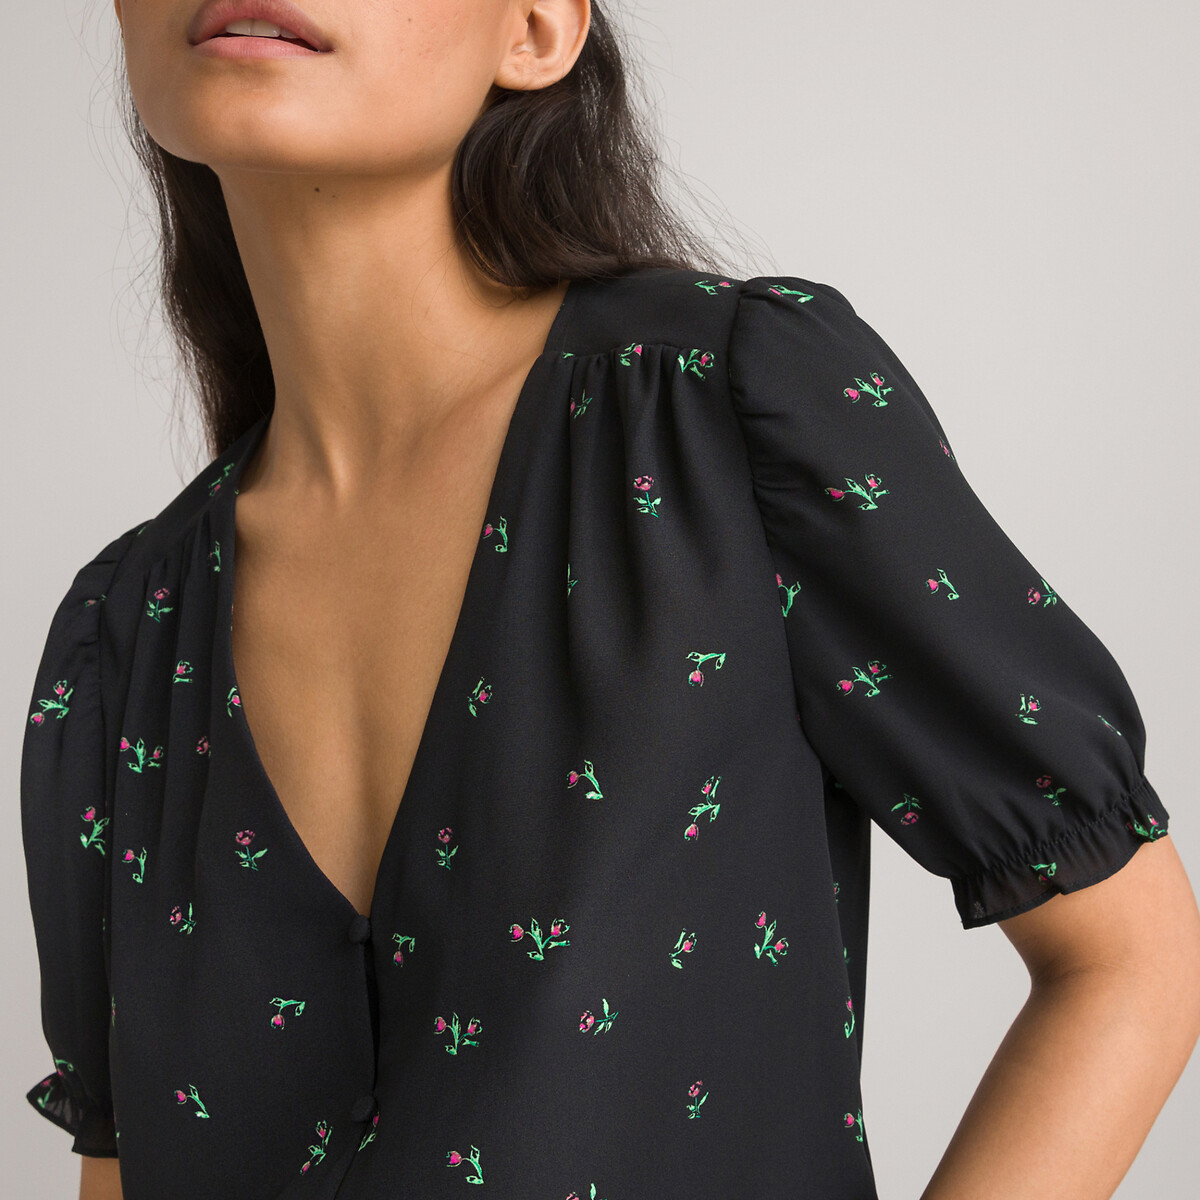 Floral V-Neck Shirt with Short Sleeves